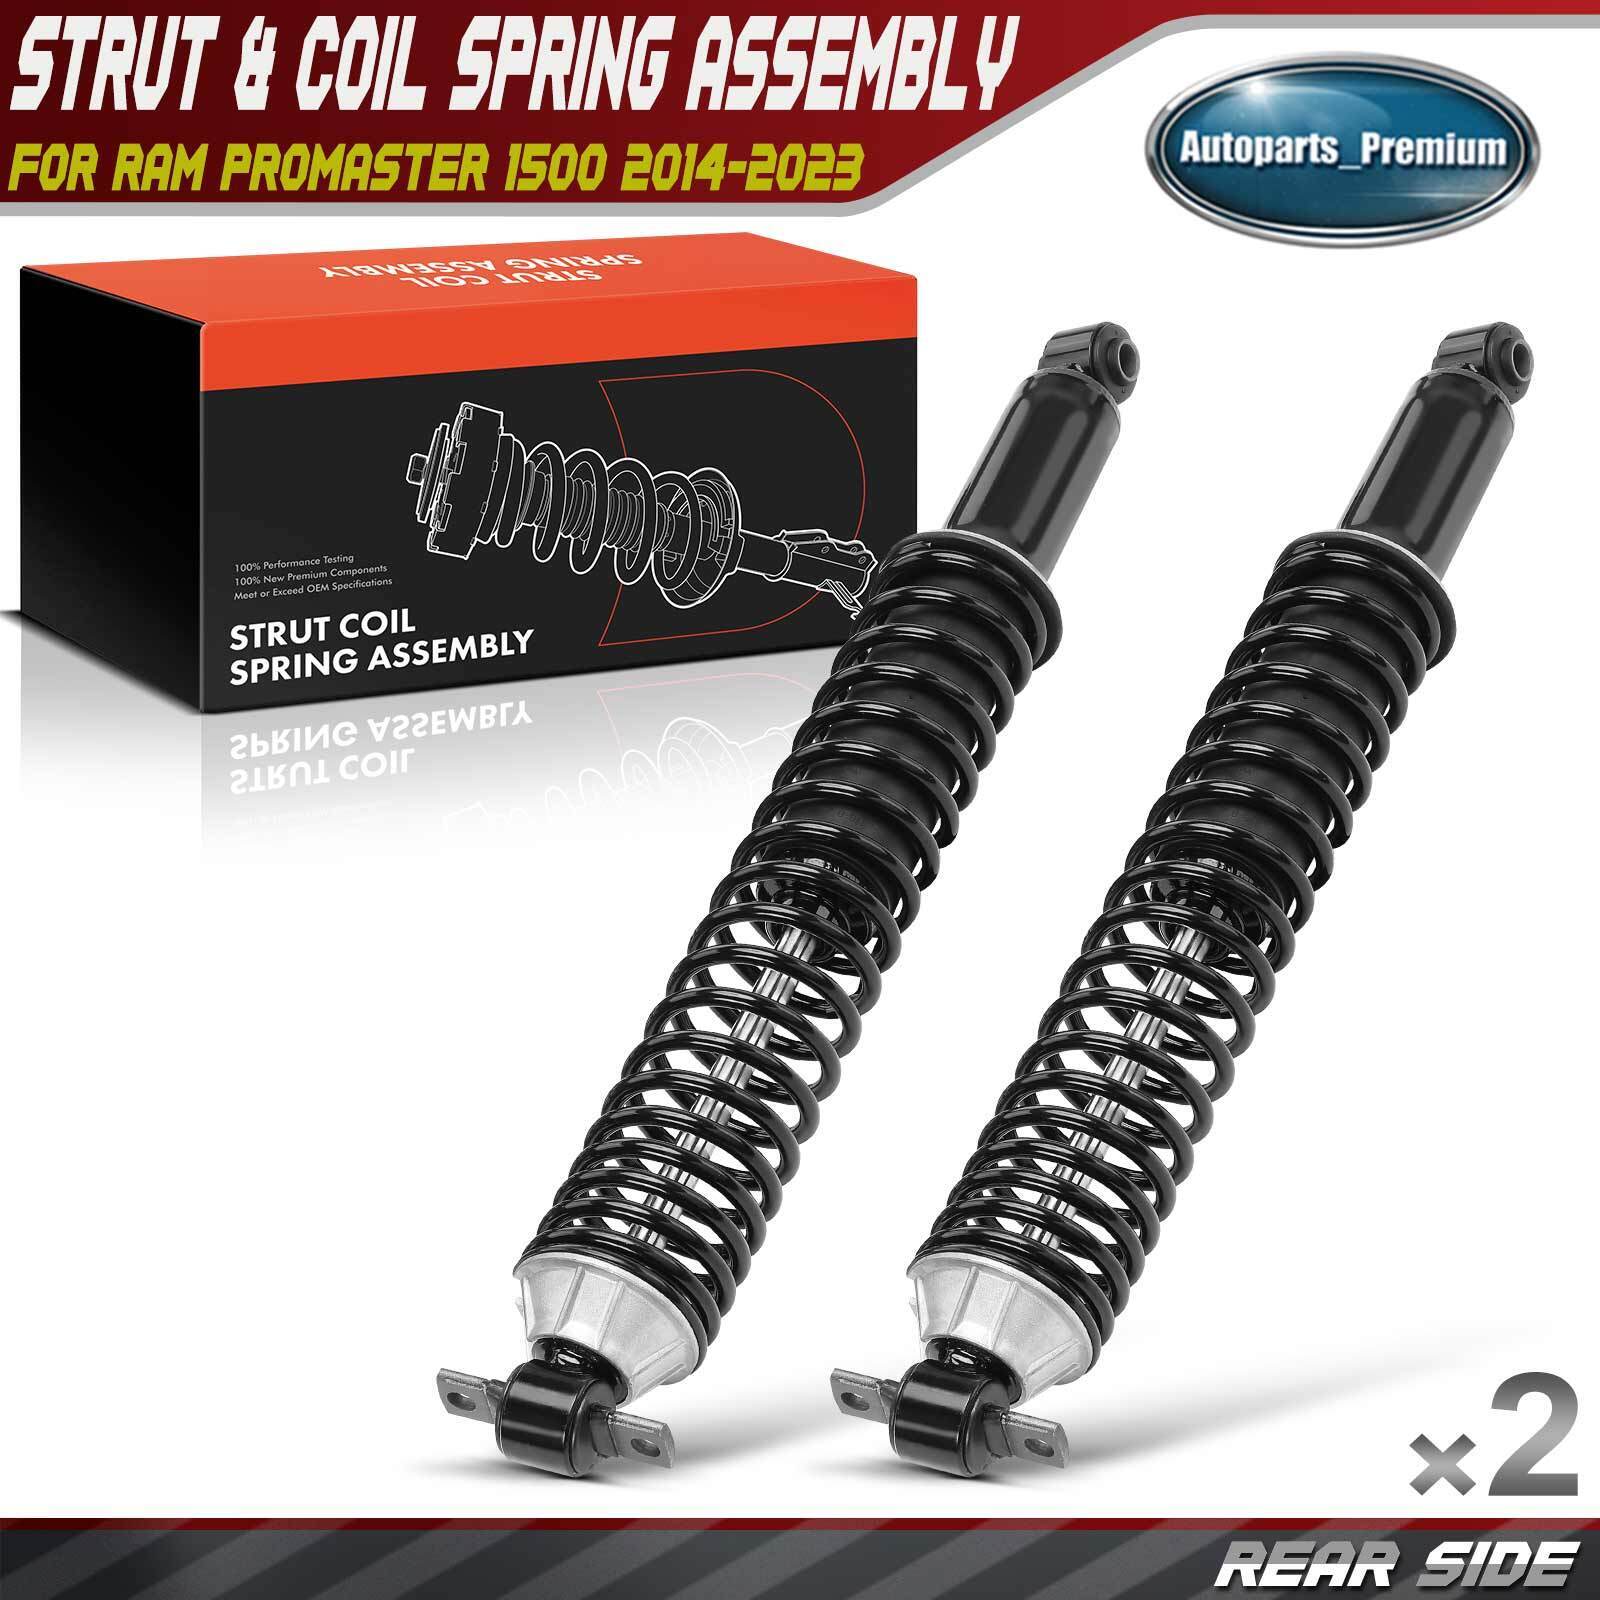 2pcs Rear L & R Complete Strut & Coil Spring Assembly for Chevy S10 Blazer GMC